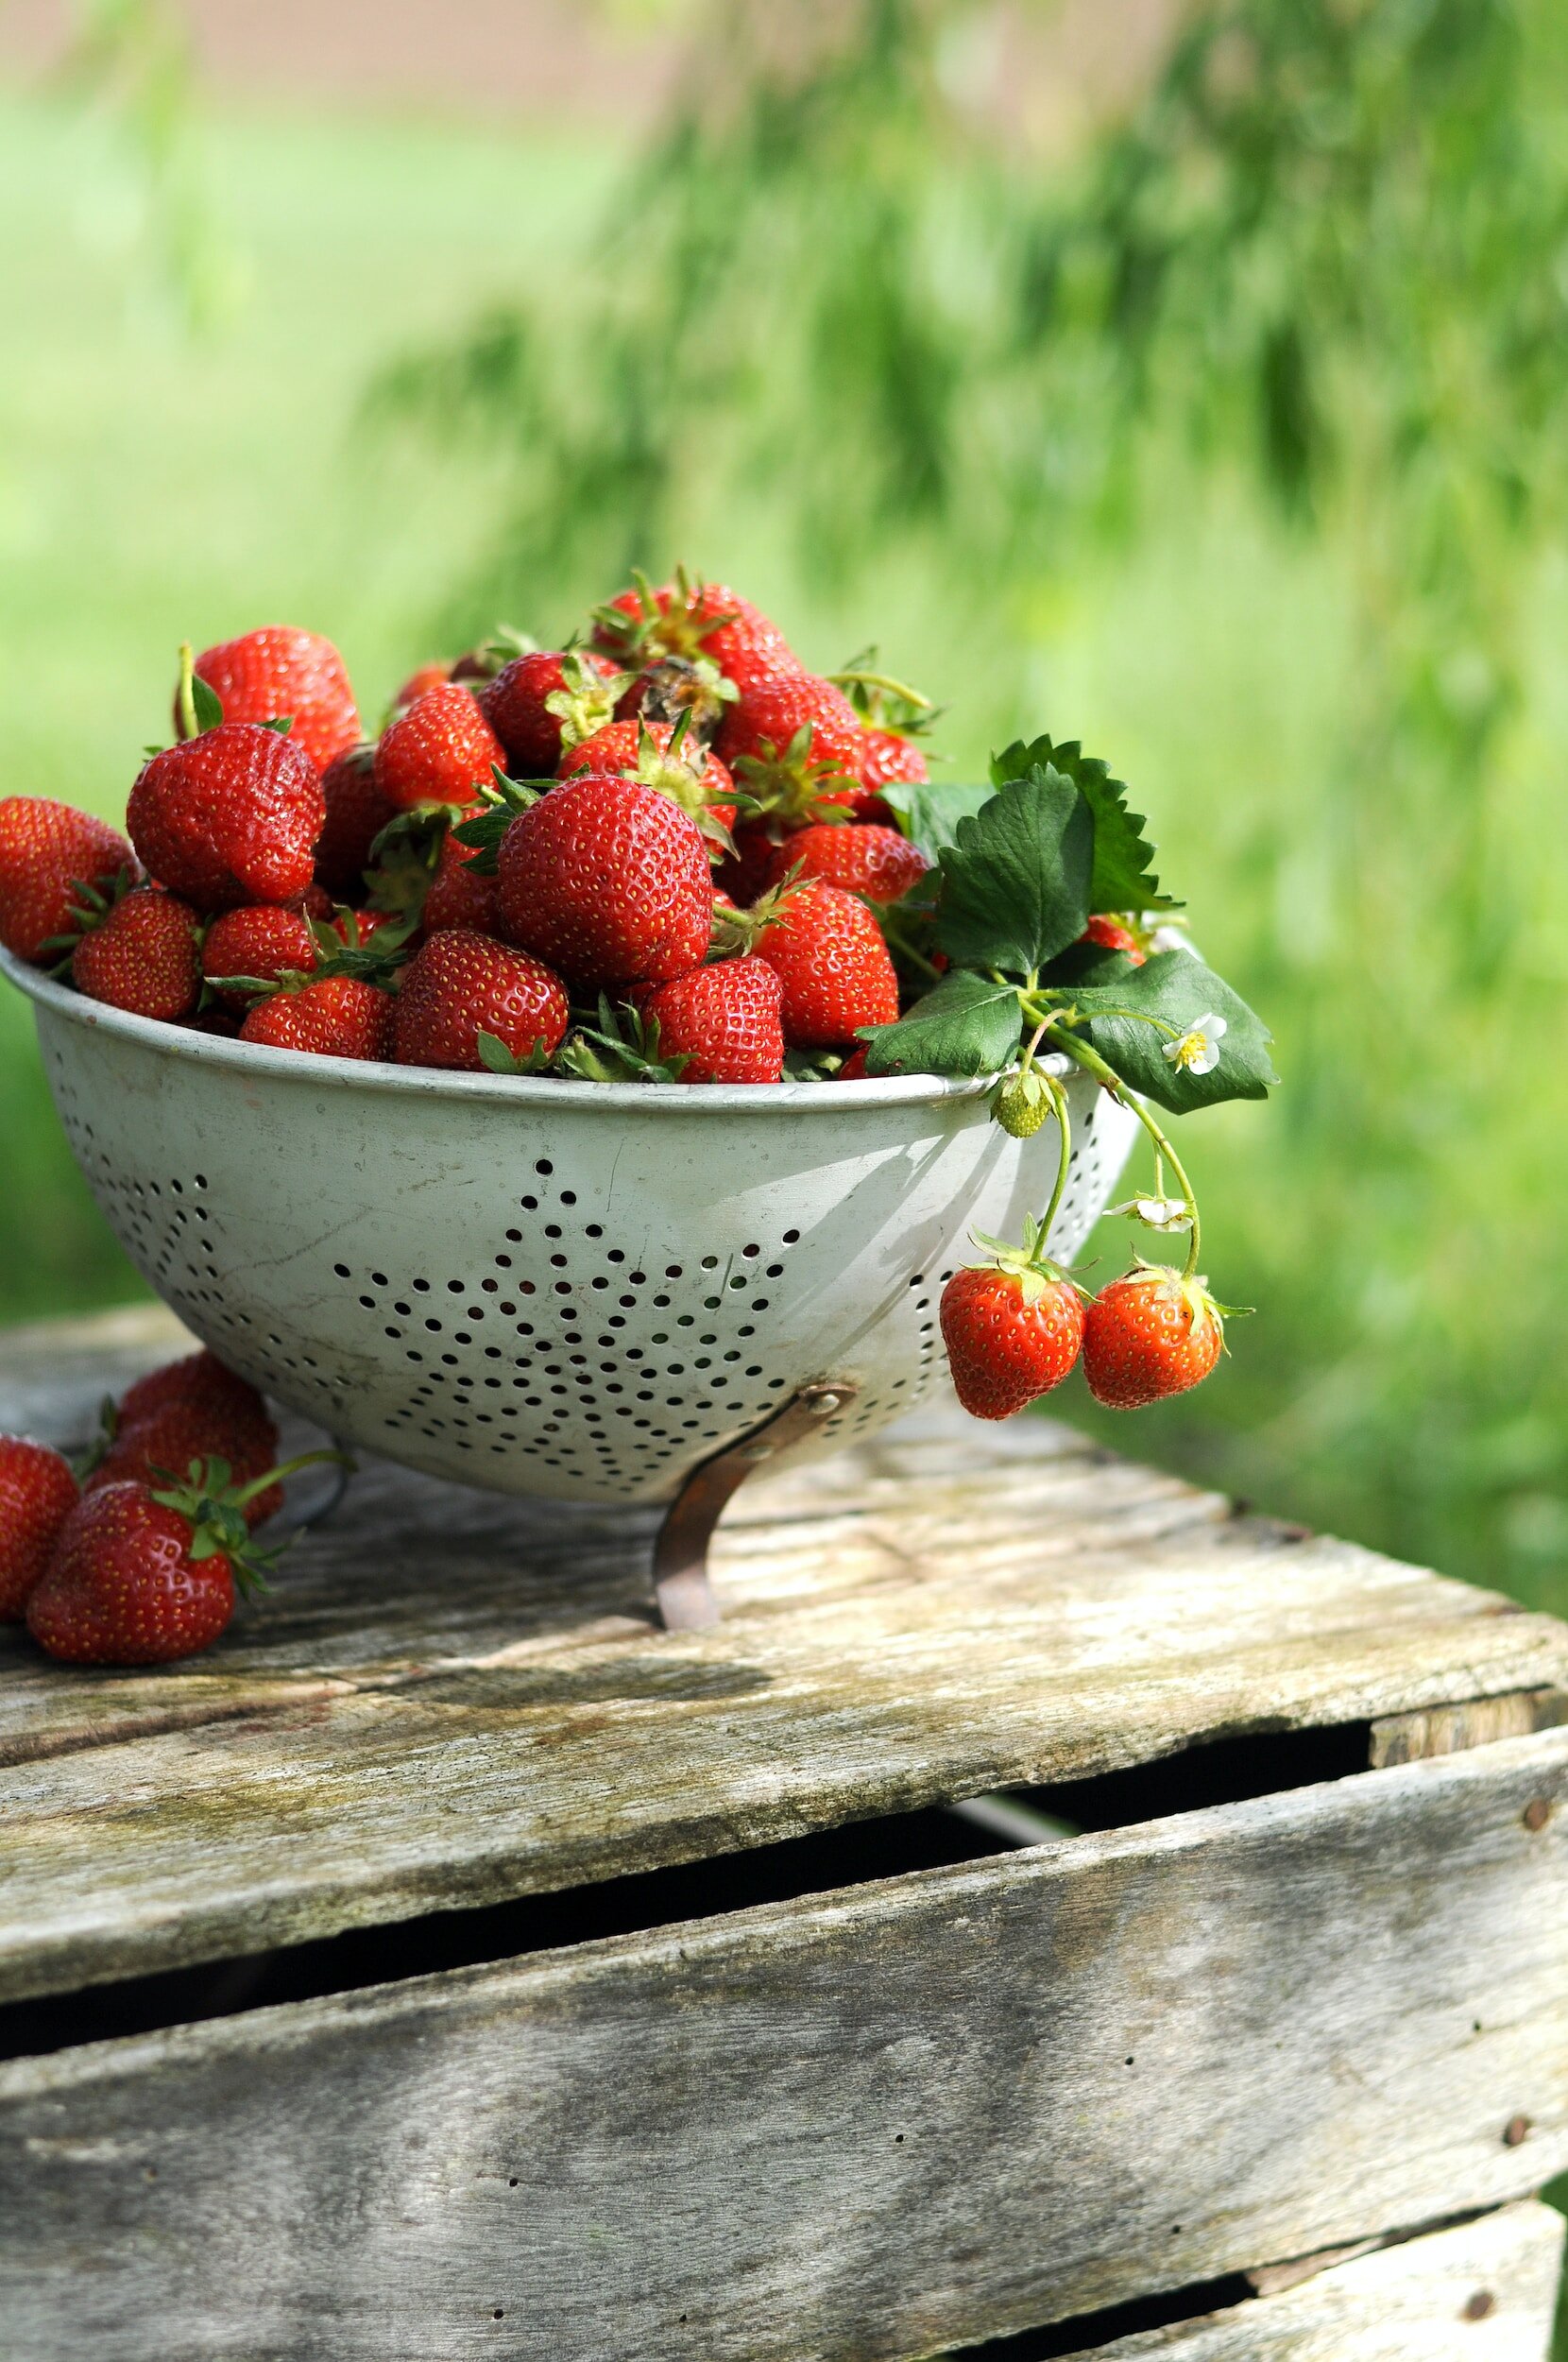 How To Grow Strawberries In Your Backyard - Simple Secrets To Success!